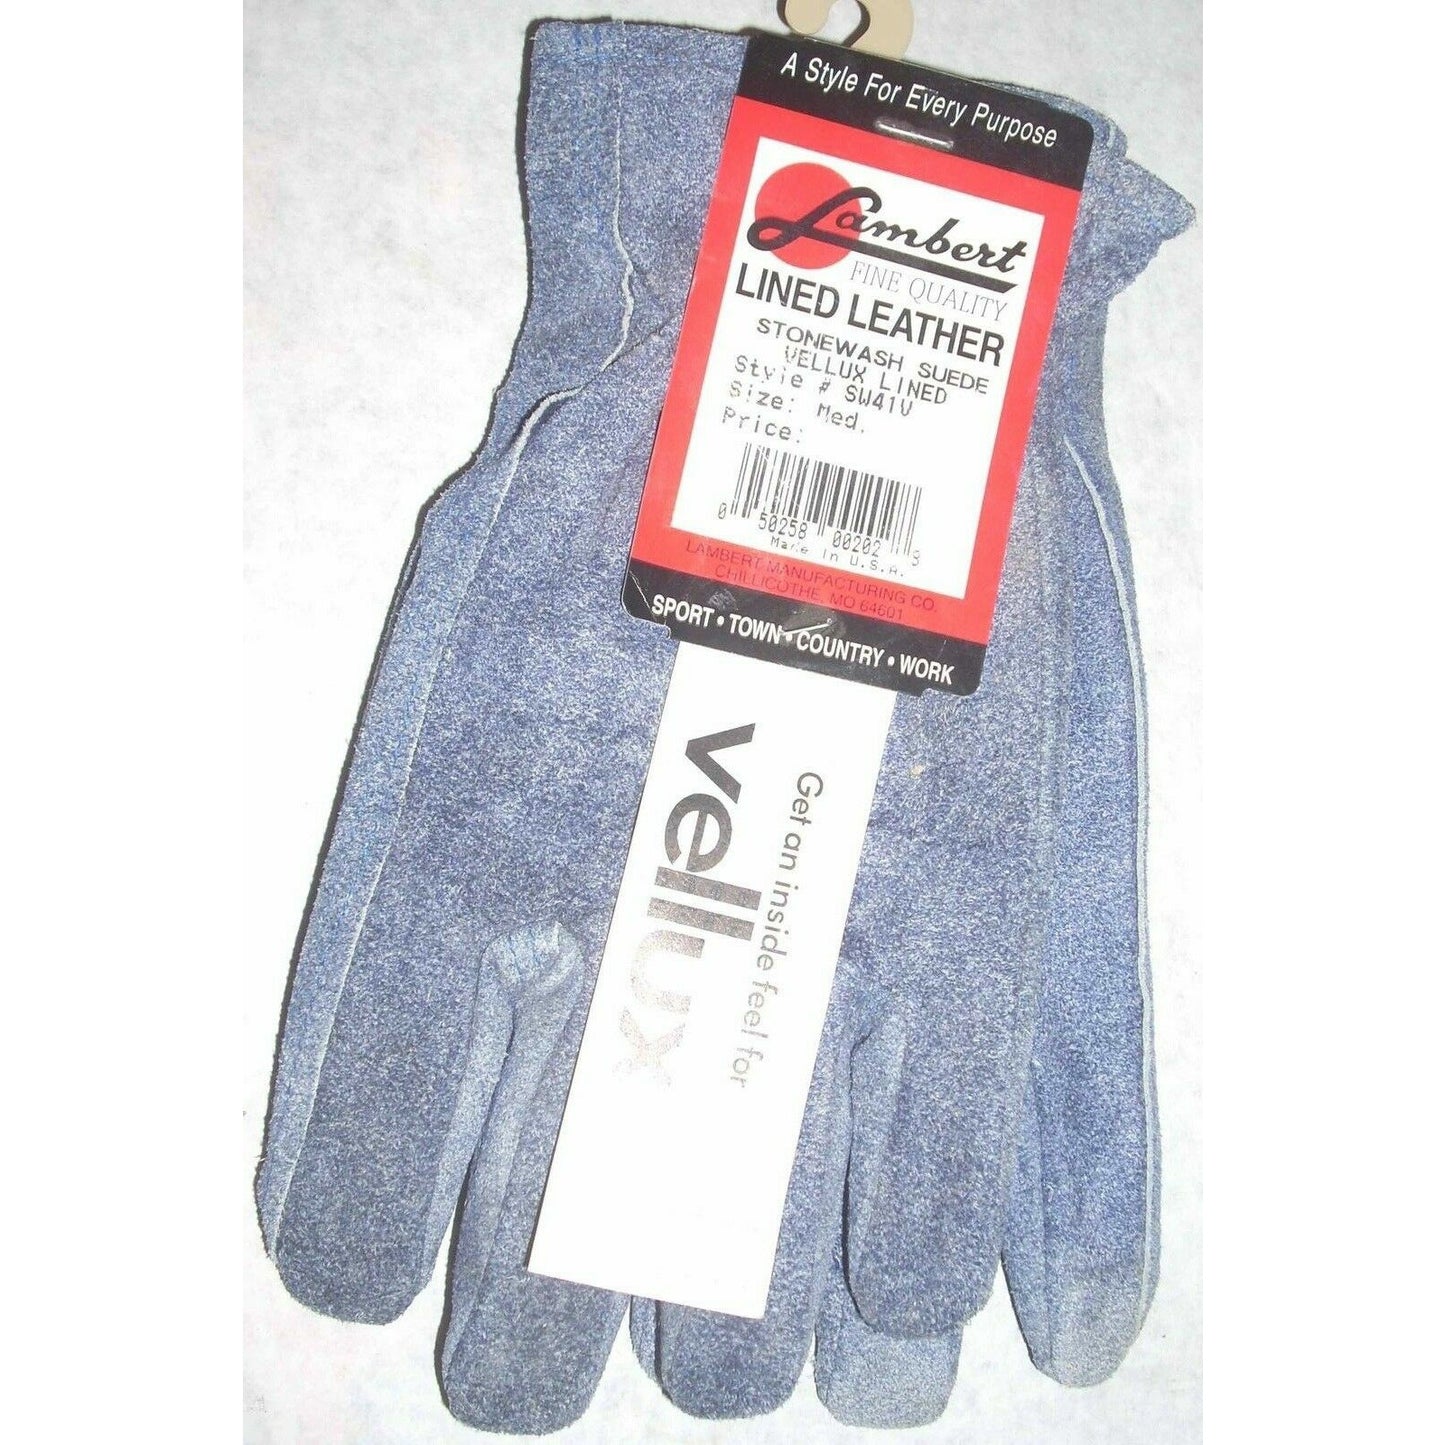 Lambert SW41V Blue Suede Leather Gloves Vellux Lined Medium